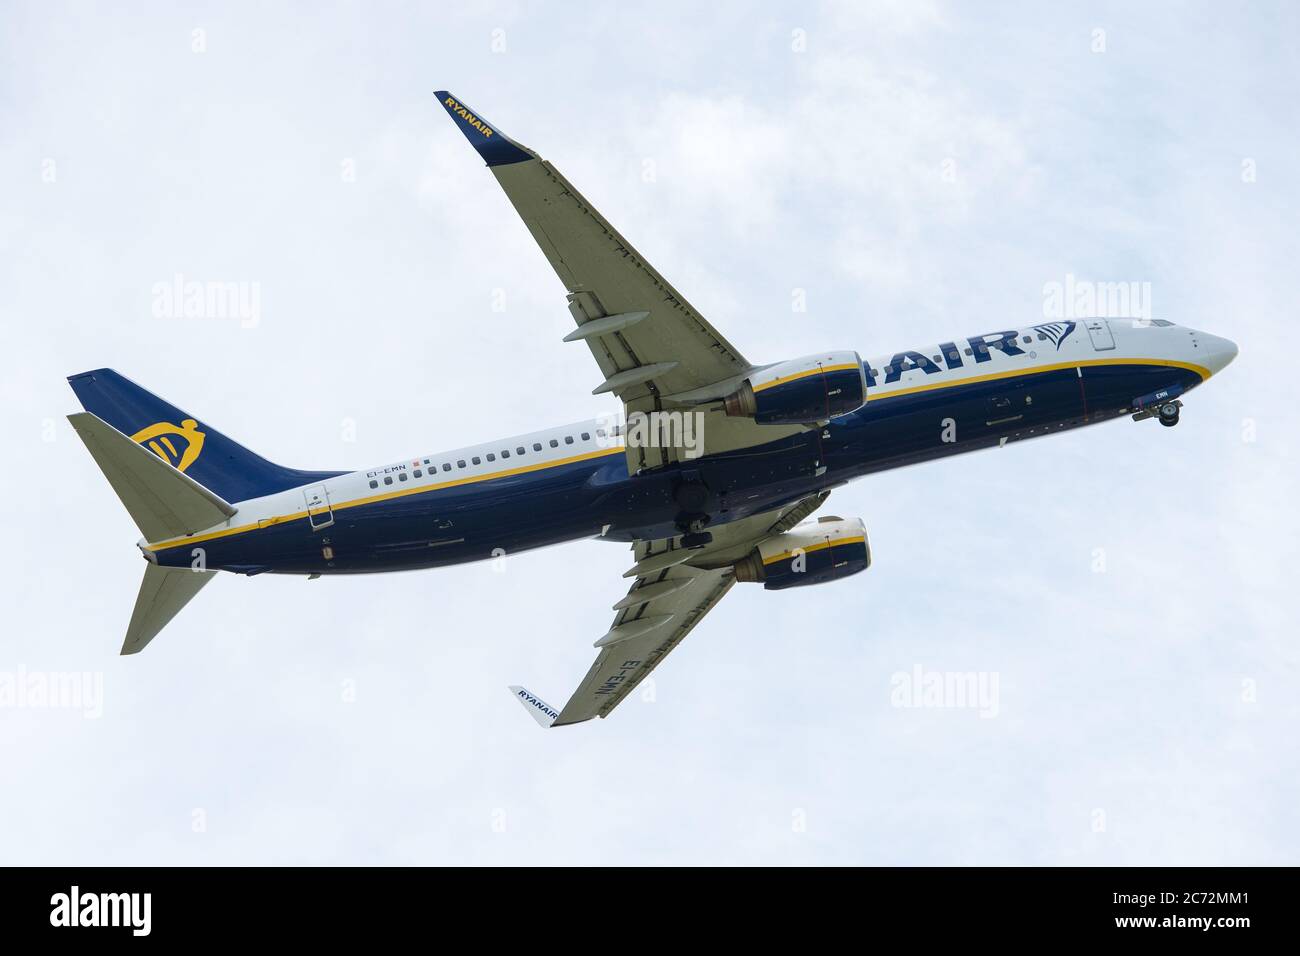 Prestwick, Scotland, UK. 13th July, 2020. Pictured: A Ryanair flight (Boeing 737-800) departing Prestwick Airport for a European holiday destination. Ryanair has been operating full schedules since the 1st July due to the coronavirus (COVID19) crisis which has affected the global aviation industry. Passengers are required to wear face masks on their flights until further notice to help prevent the spread of coronavirus. Credit: Colin Fisher/Alamy Live News Stock Photo